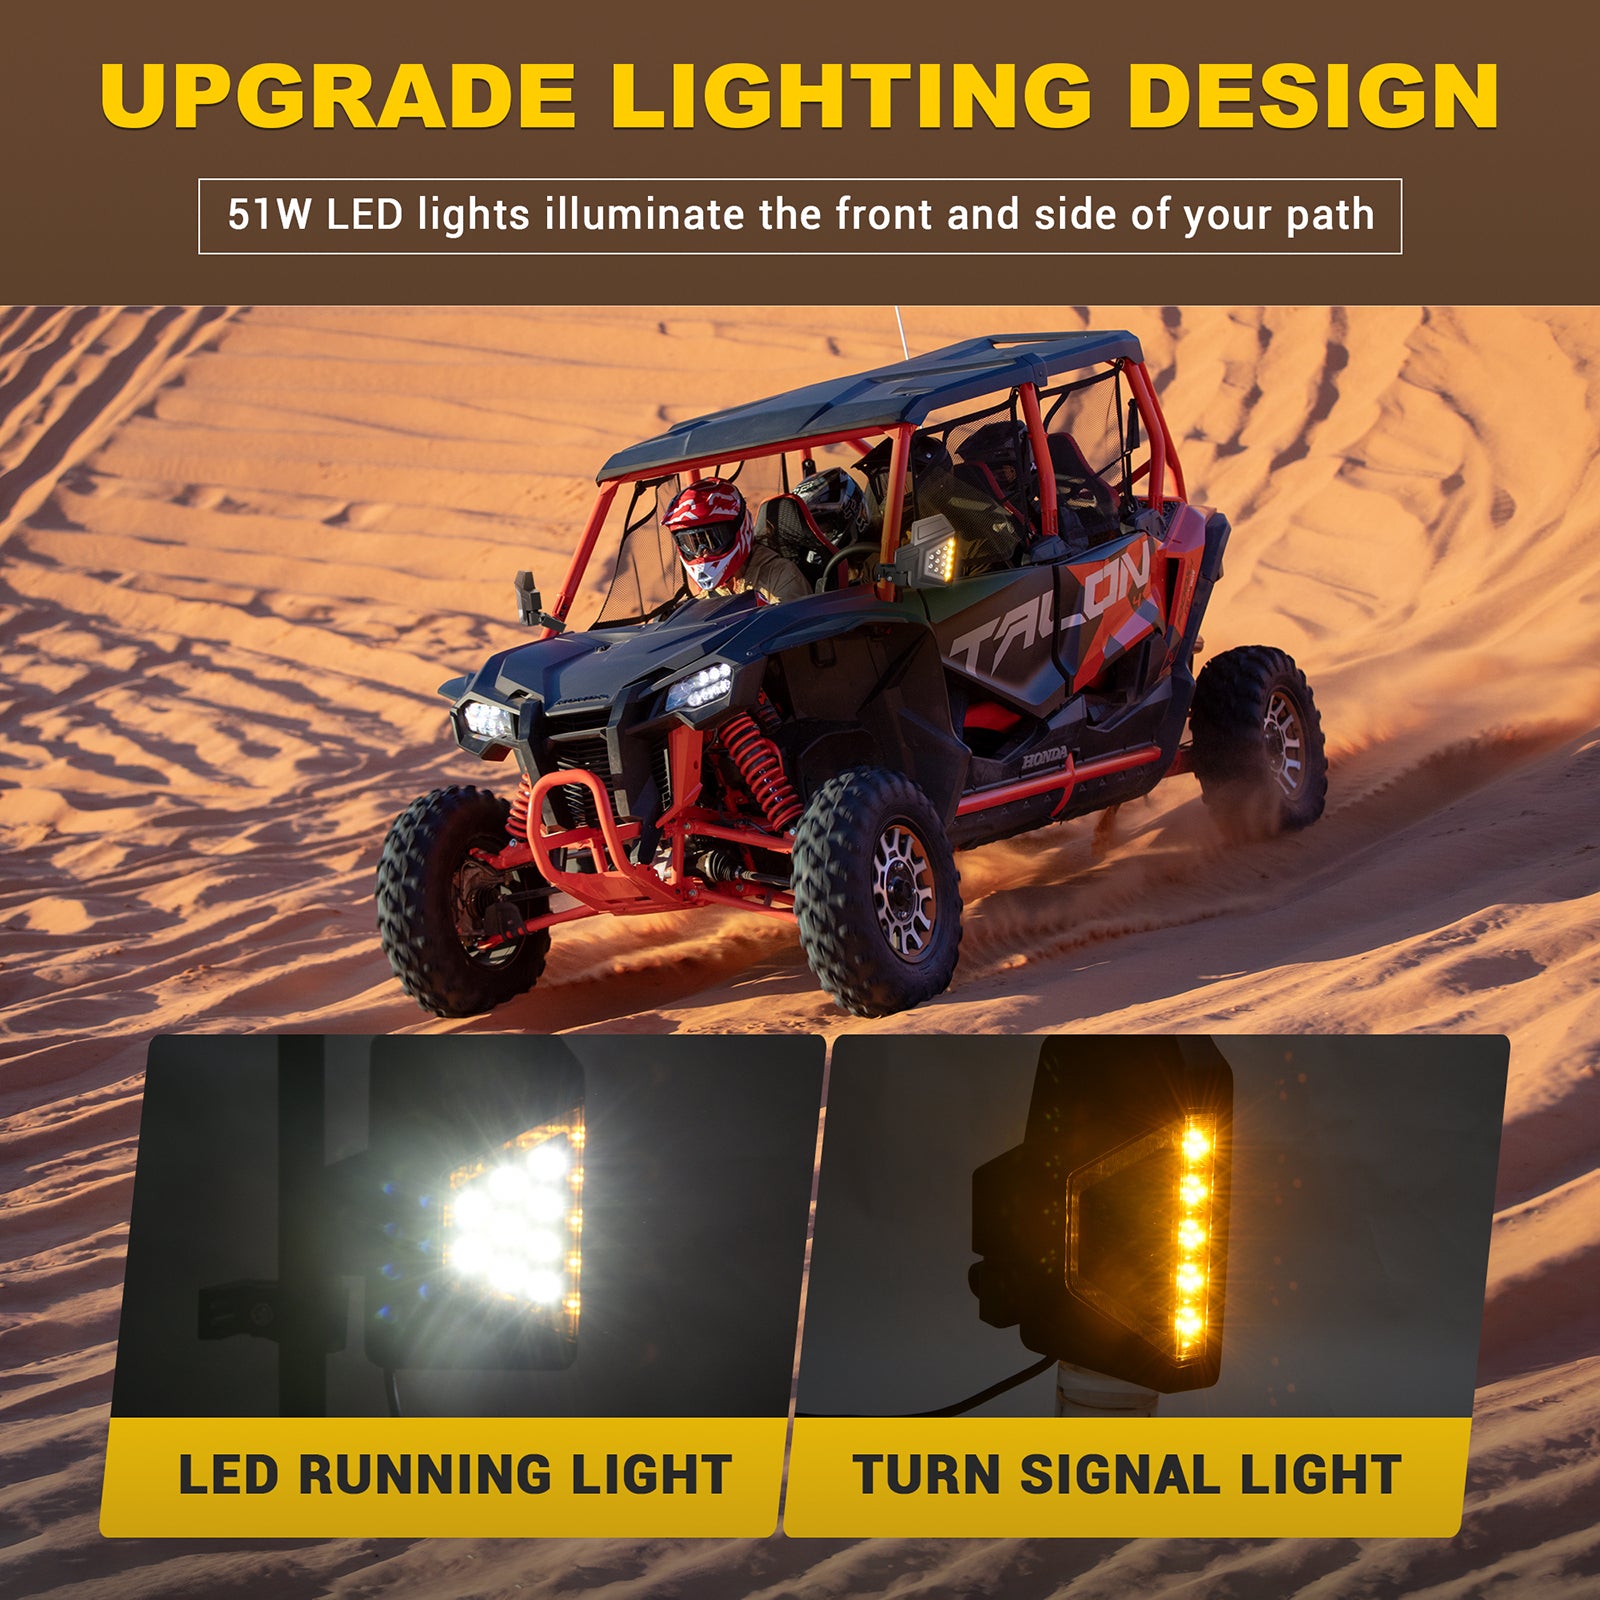 UTV RZR Side Rear View Mirrors with 51W LED Lights, Fit All 1.5 -1.75 Inch Roll Bar Cage